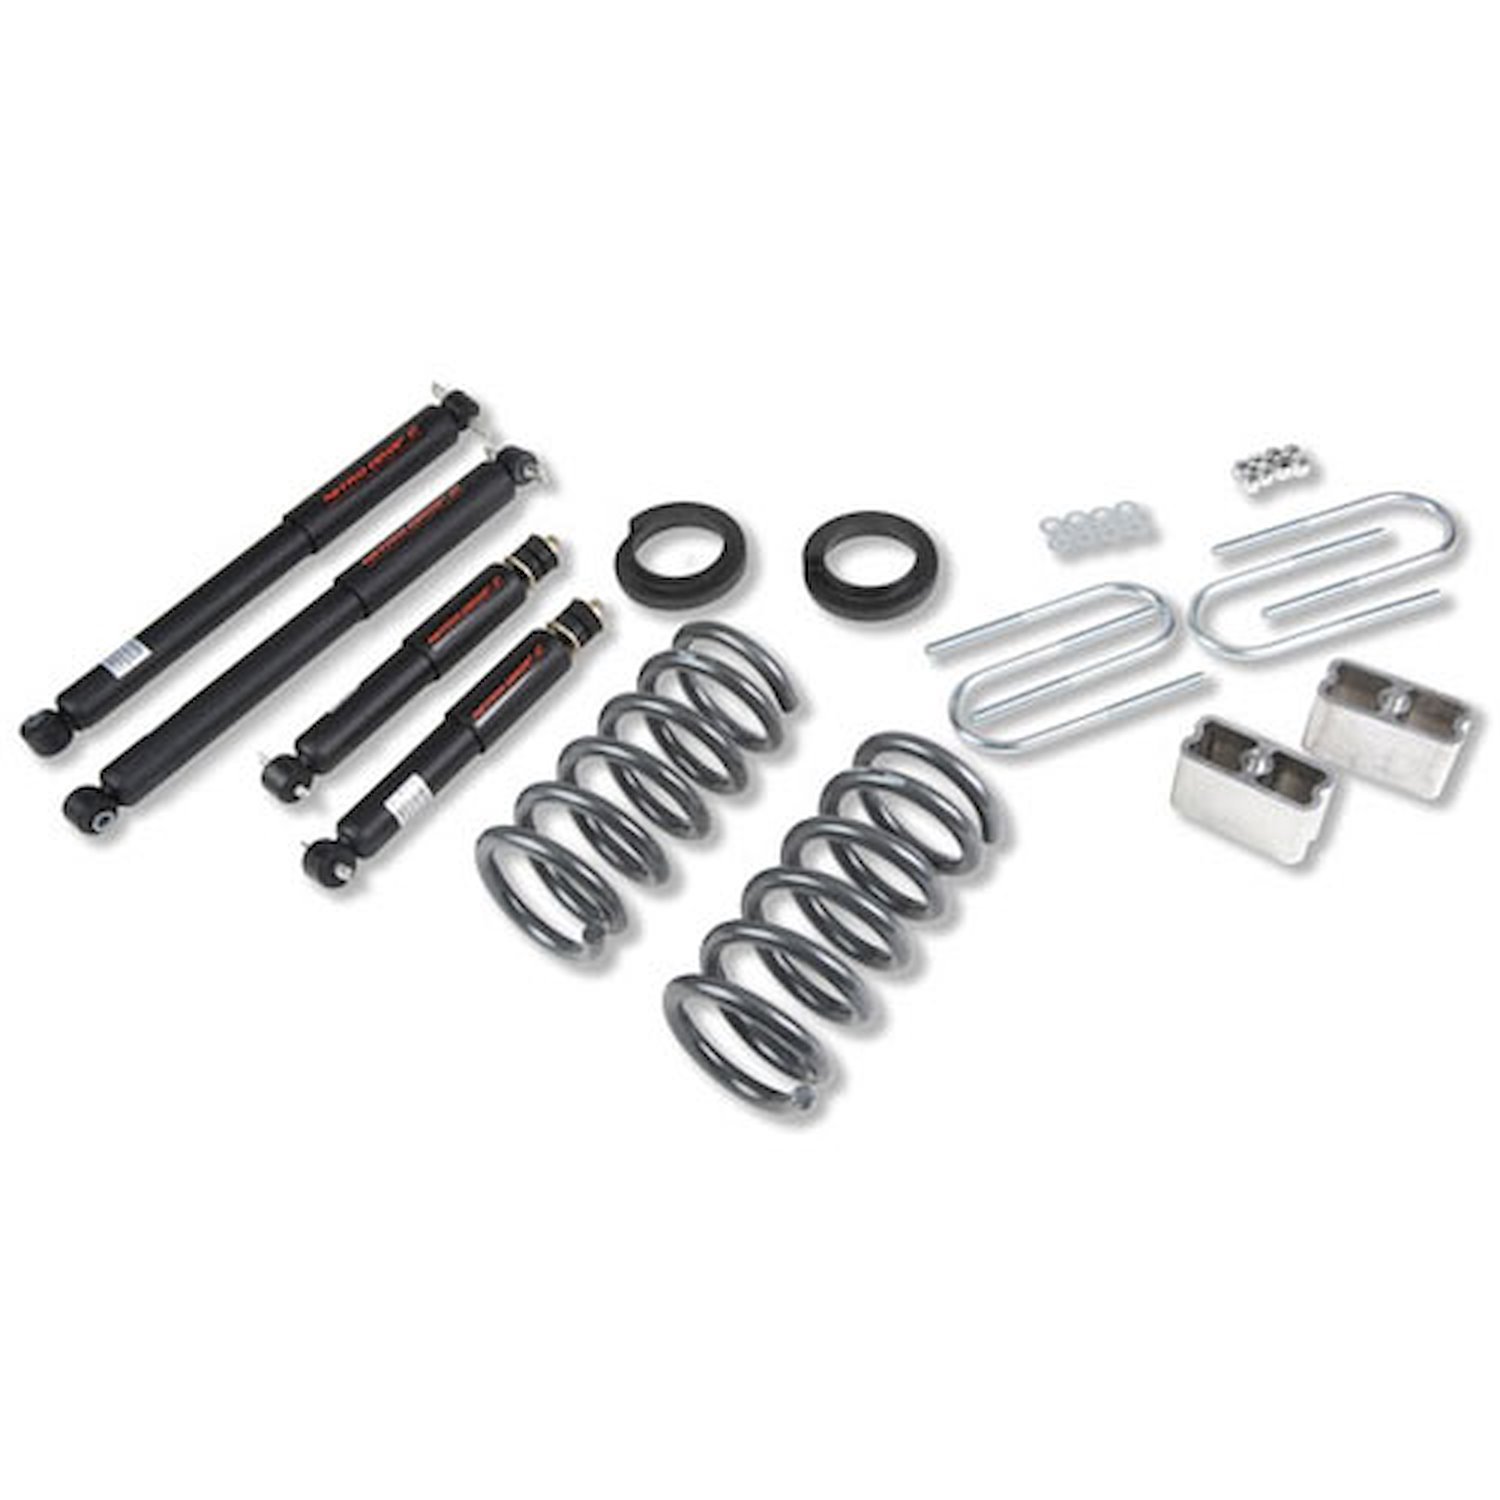 Complete Lowering Kit for 1994-2004 Chevy S10/GMC S15